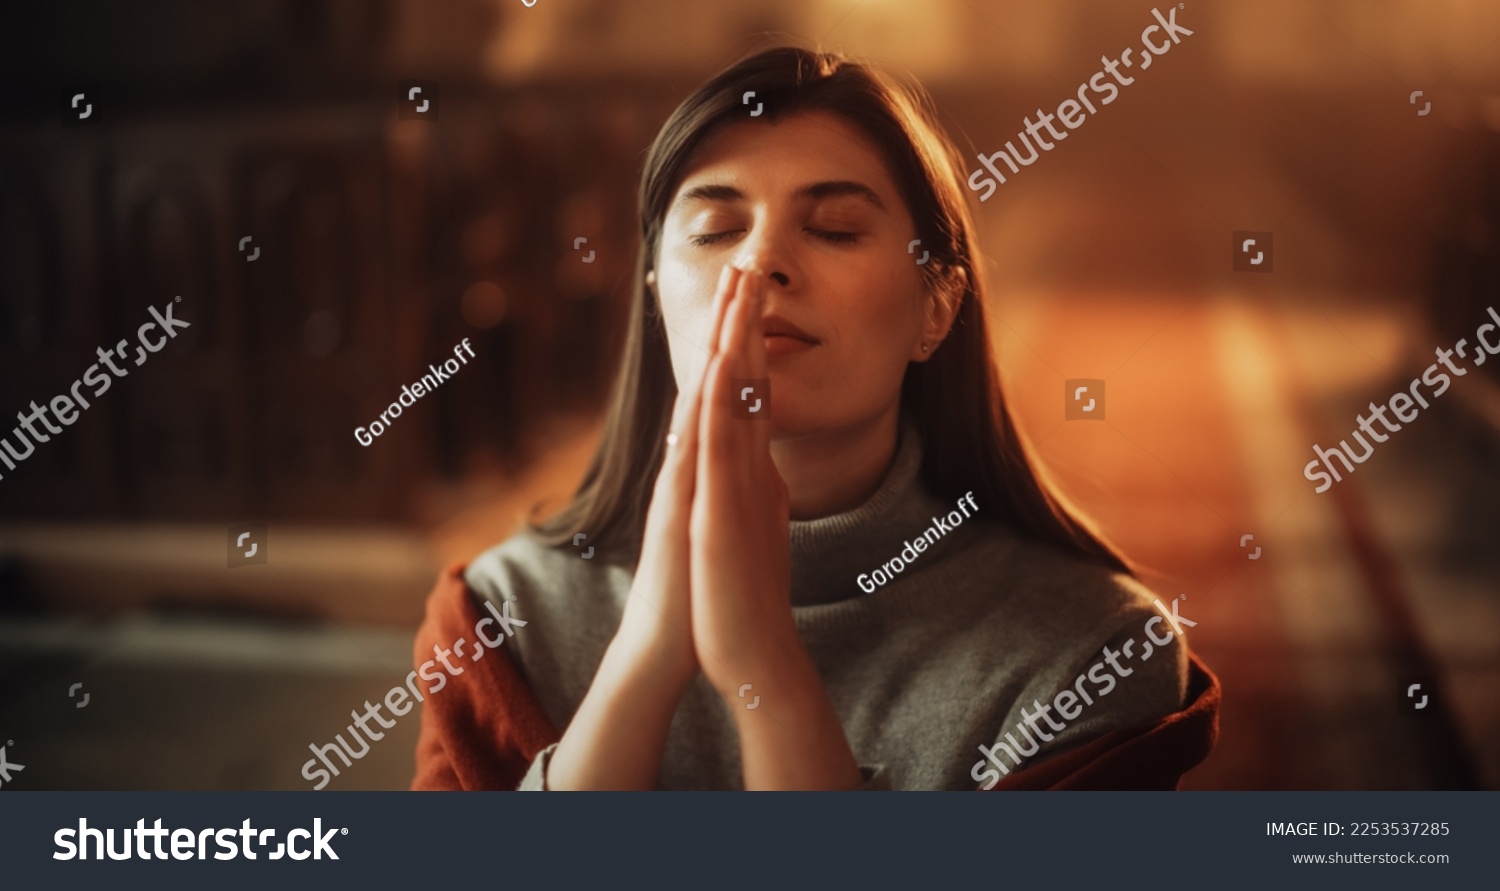 Devout Praying Christian Woman, Bowing In Humble Reverence To God. With Hands Folded She Looks Upwards Before Closing Eyes. Seeking Guidance and Strength to Live a Life in Accordance with The Bible #2253537285